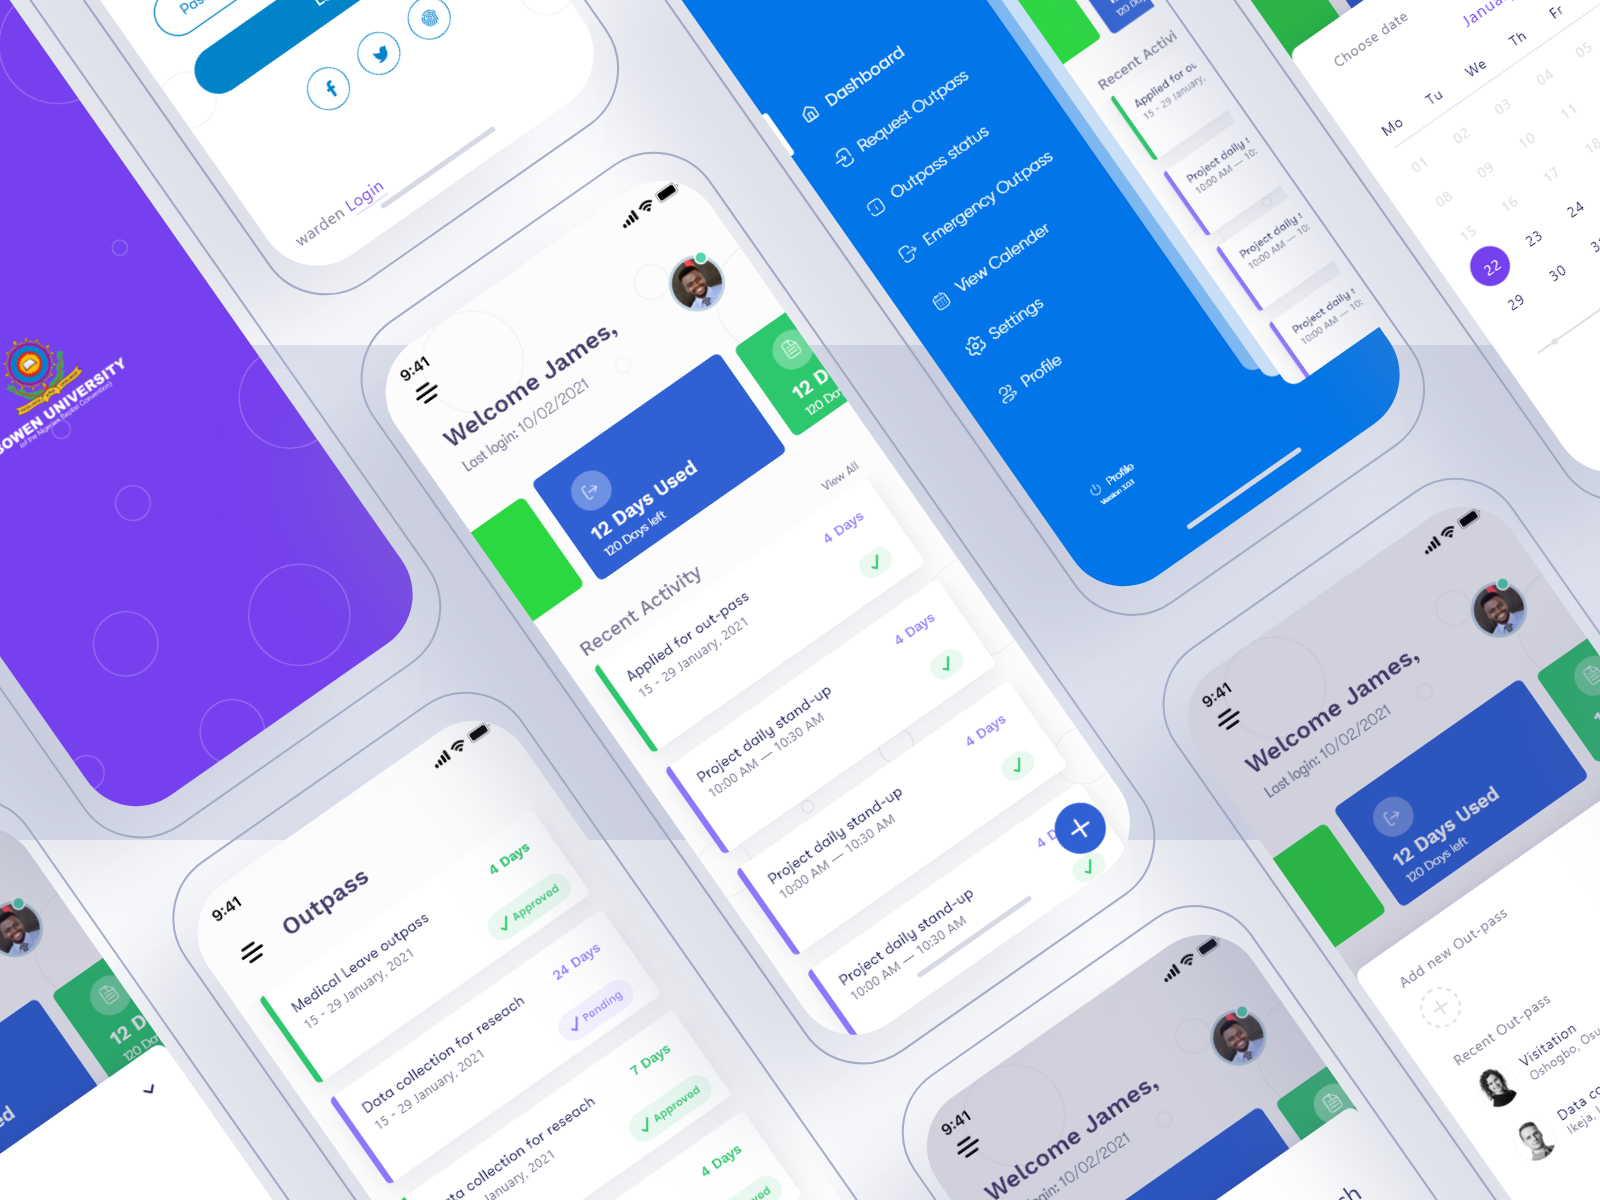 Sign-outs and Exeats system by James Adeshina on Dribbble